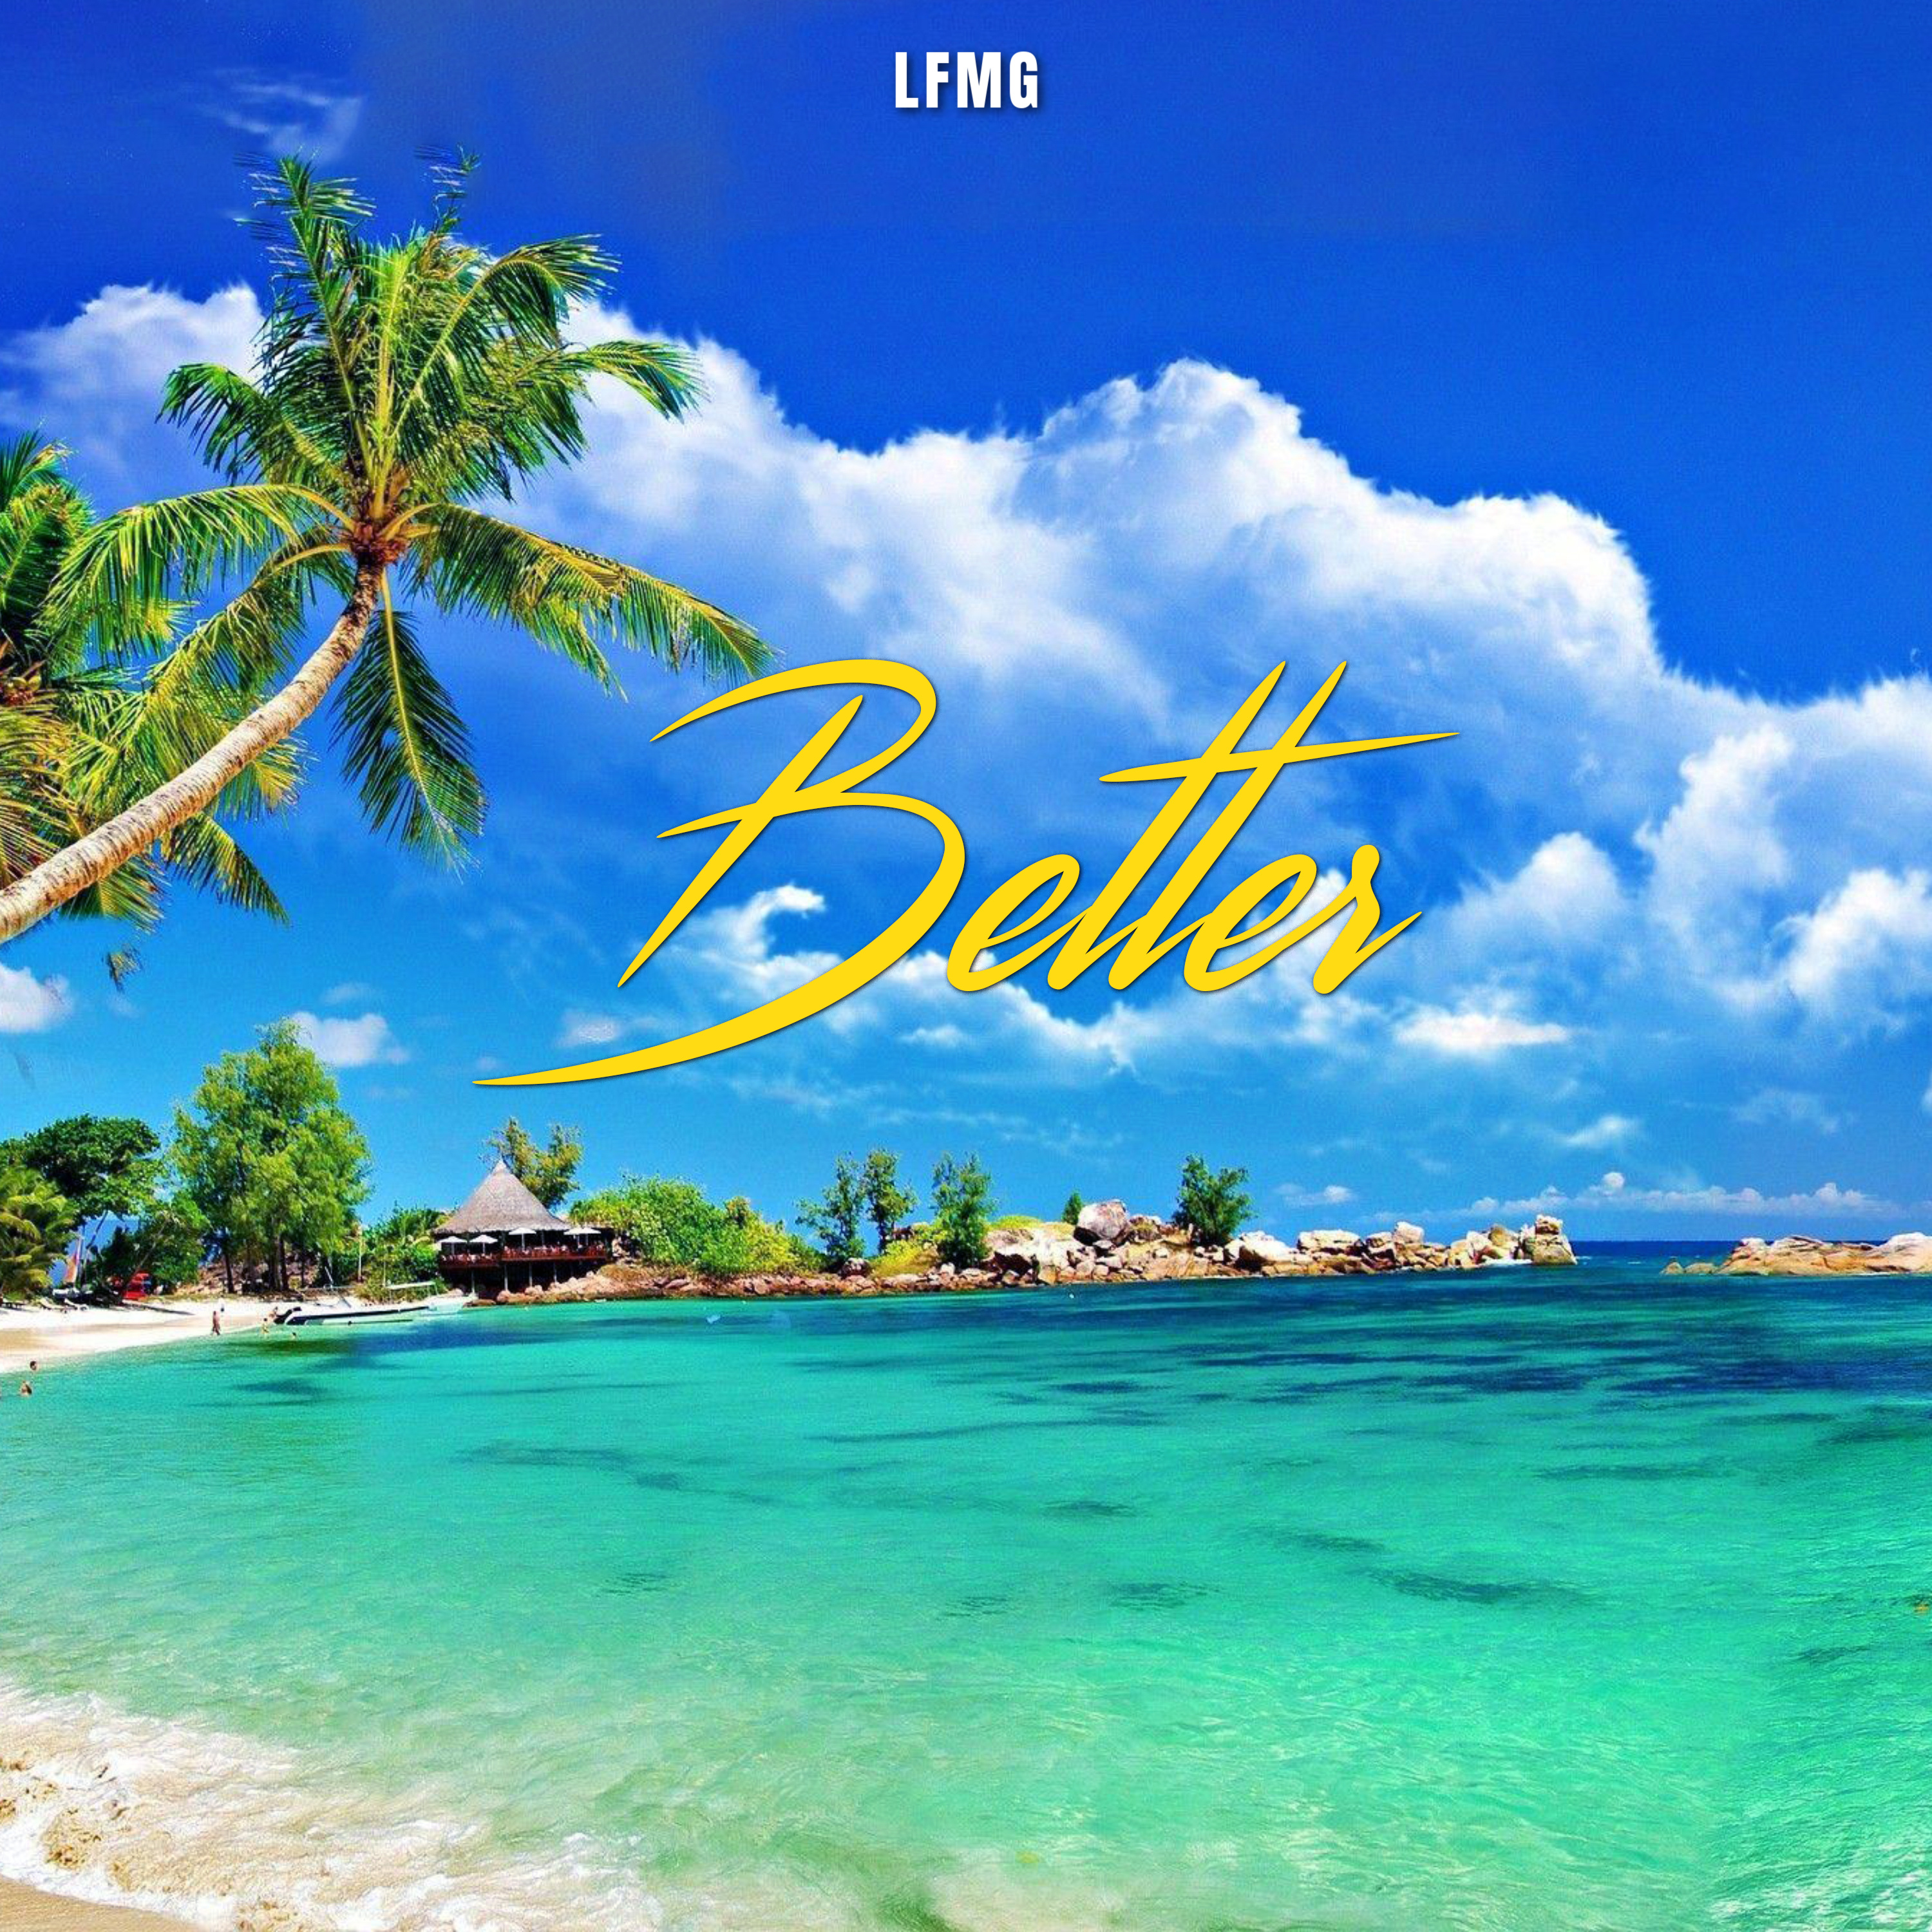 Art for Better (Radio Edit) by LFMG